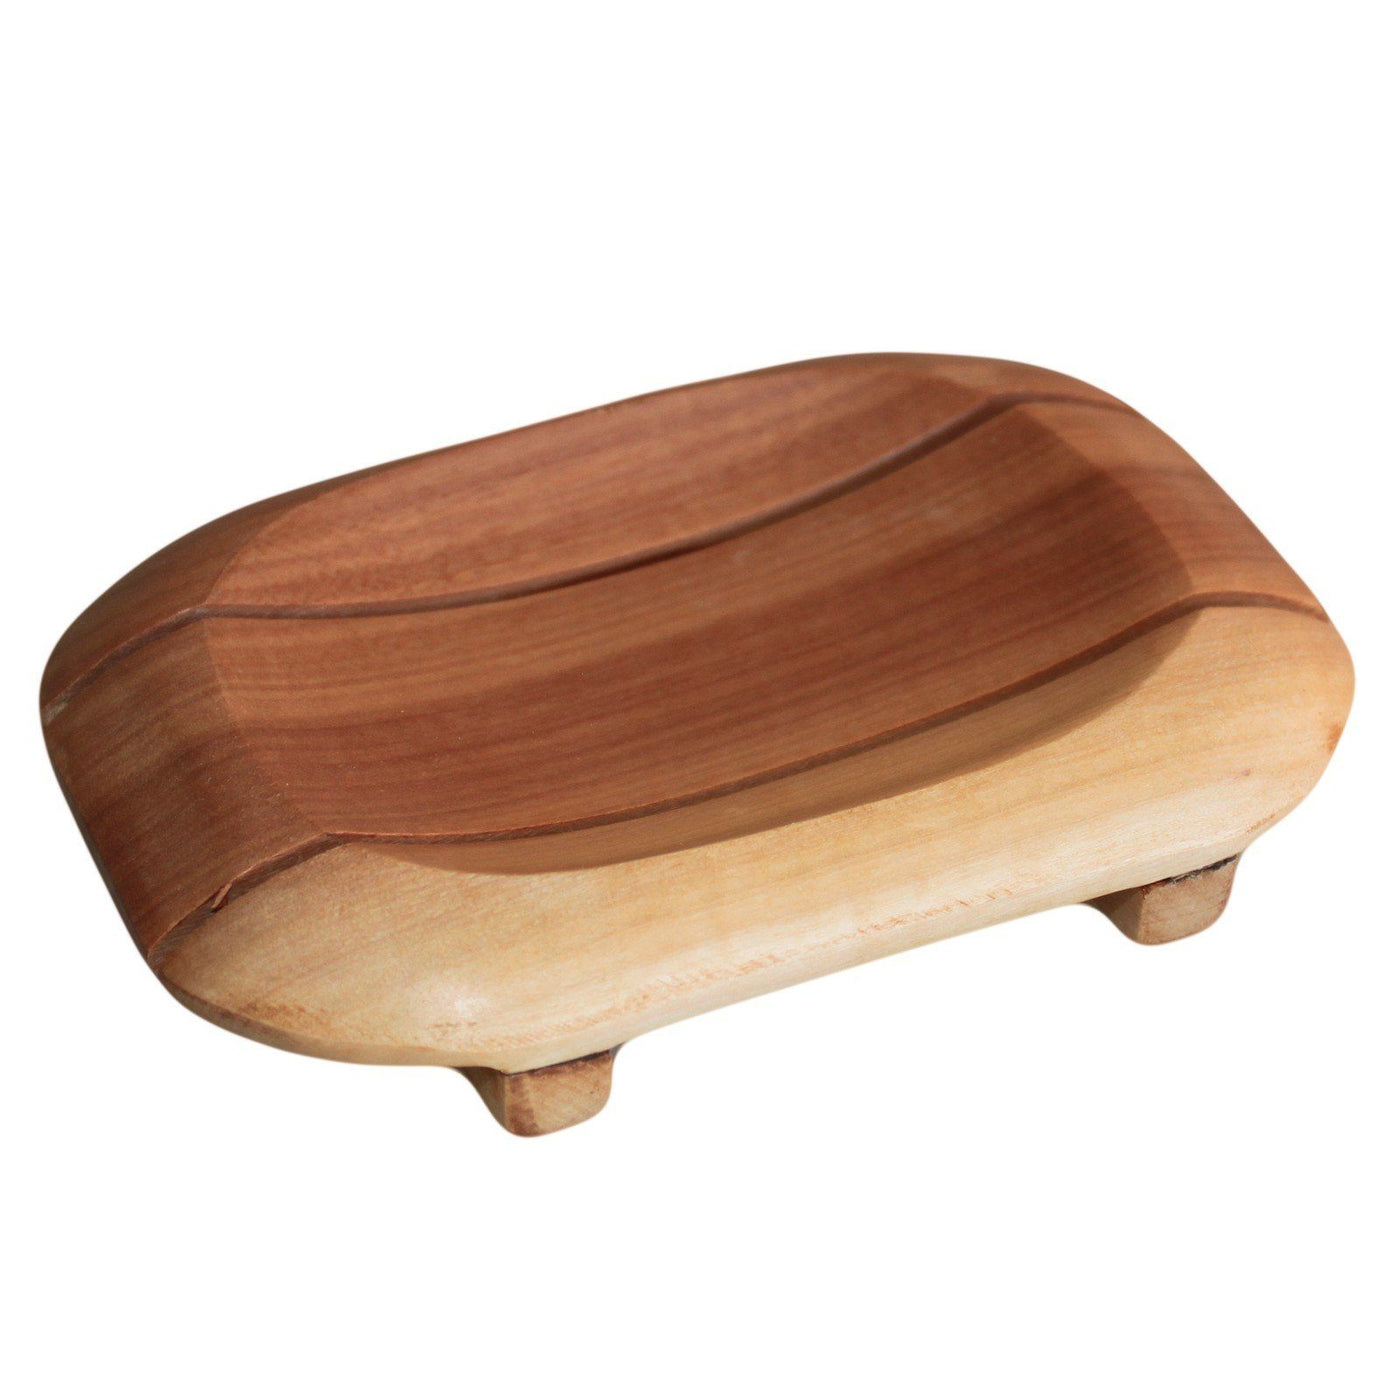 Classic Indonesian Hand Made Mahogany Soap Dish - Oval In Rectangle.